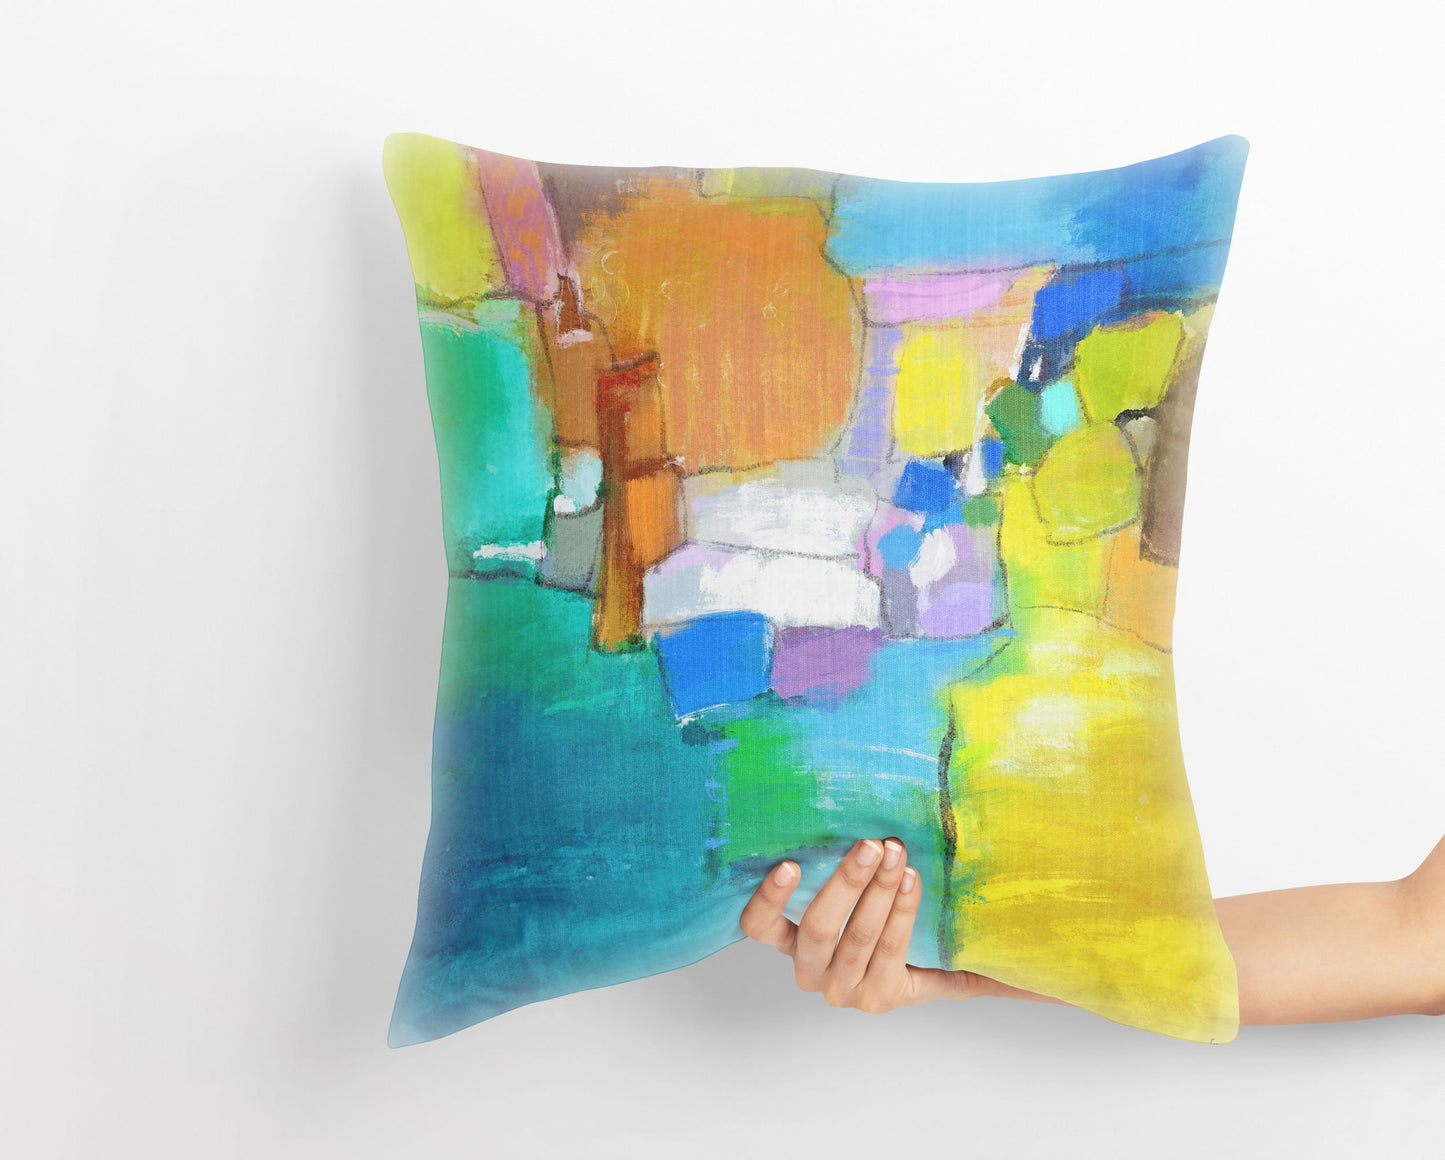 Abstract Pillow Case, Soft Pillow Cases, Colorful Pillow Case, Modern Pillow, 24X24 Pillow Case, Home Decor Pillow, Indoor Pillow Cases